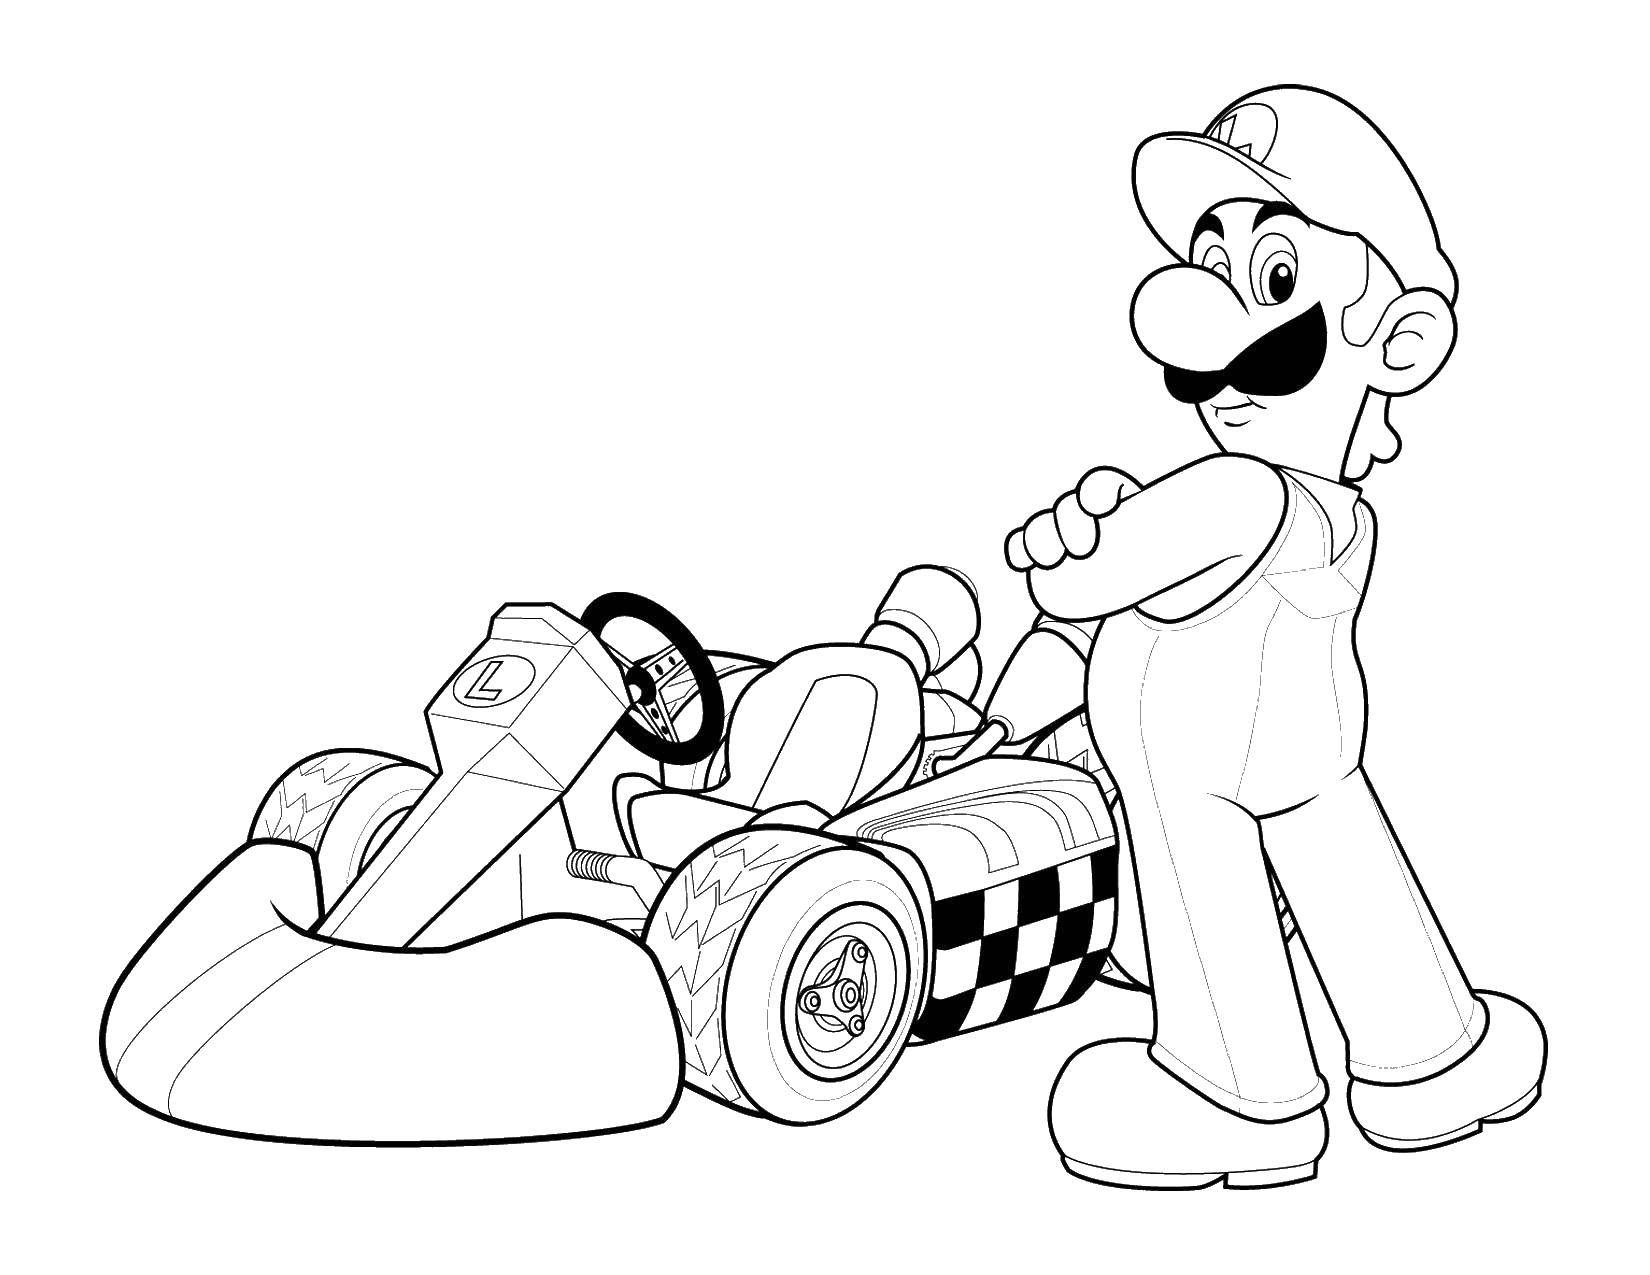 Coloring Super Mario the race car. Category The character from the game. Tags:  Super Mario.